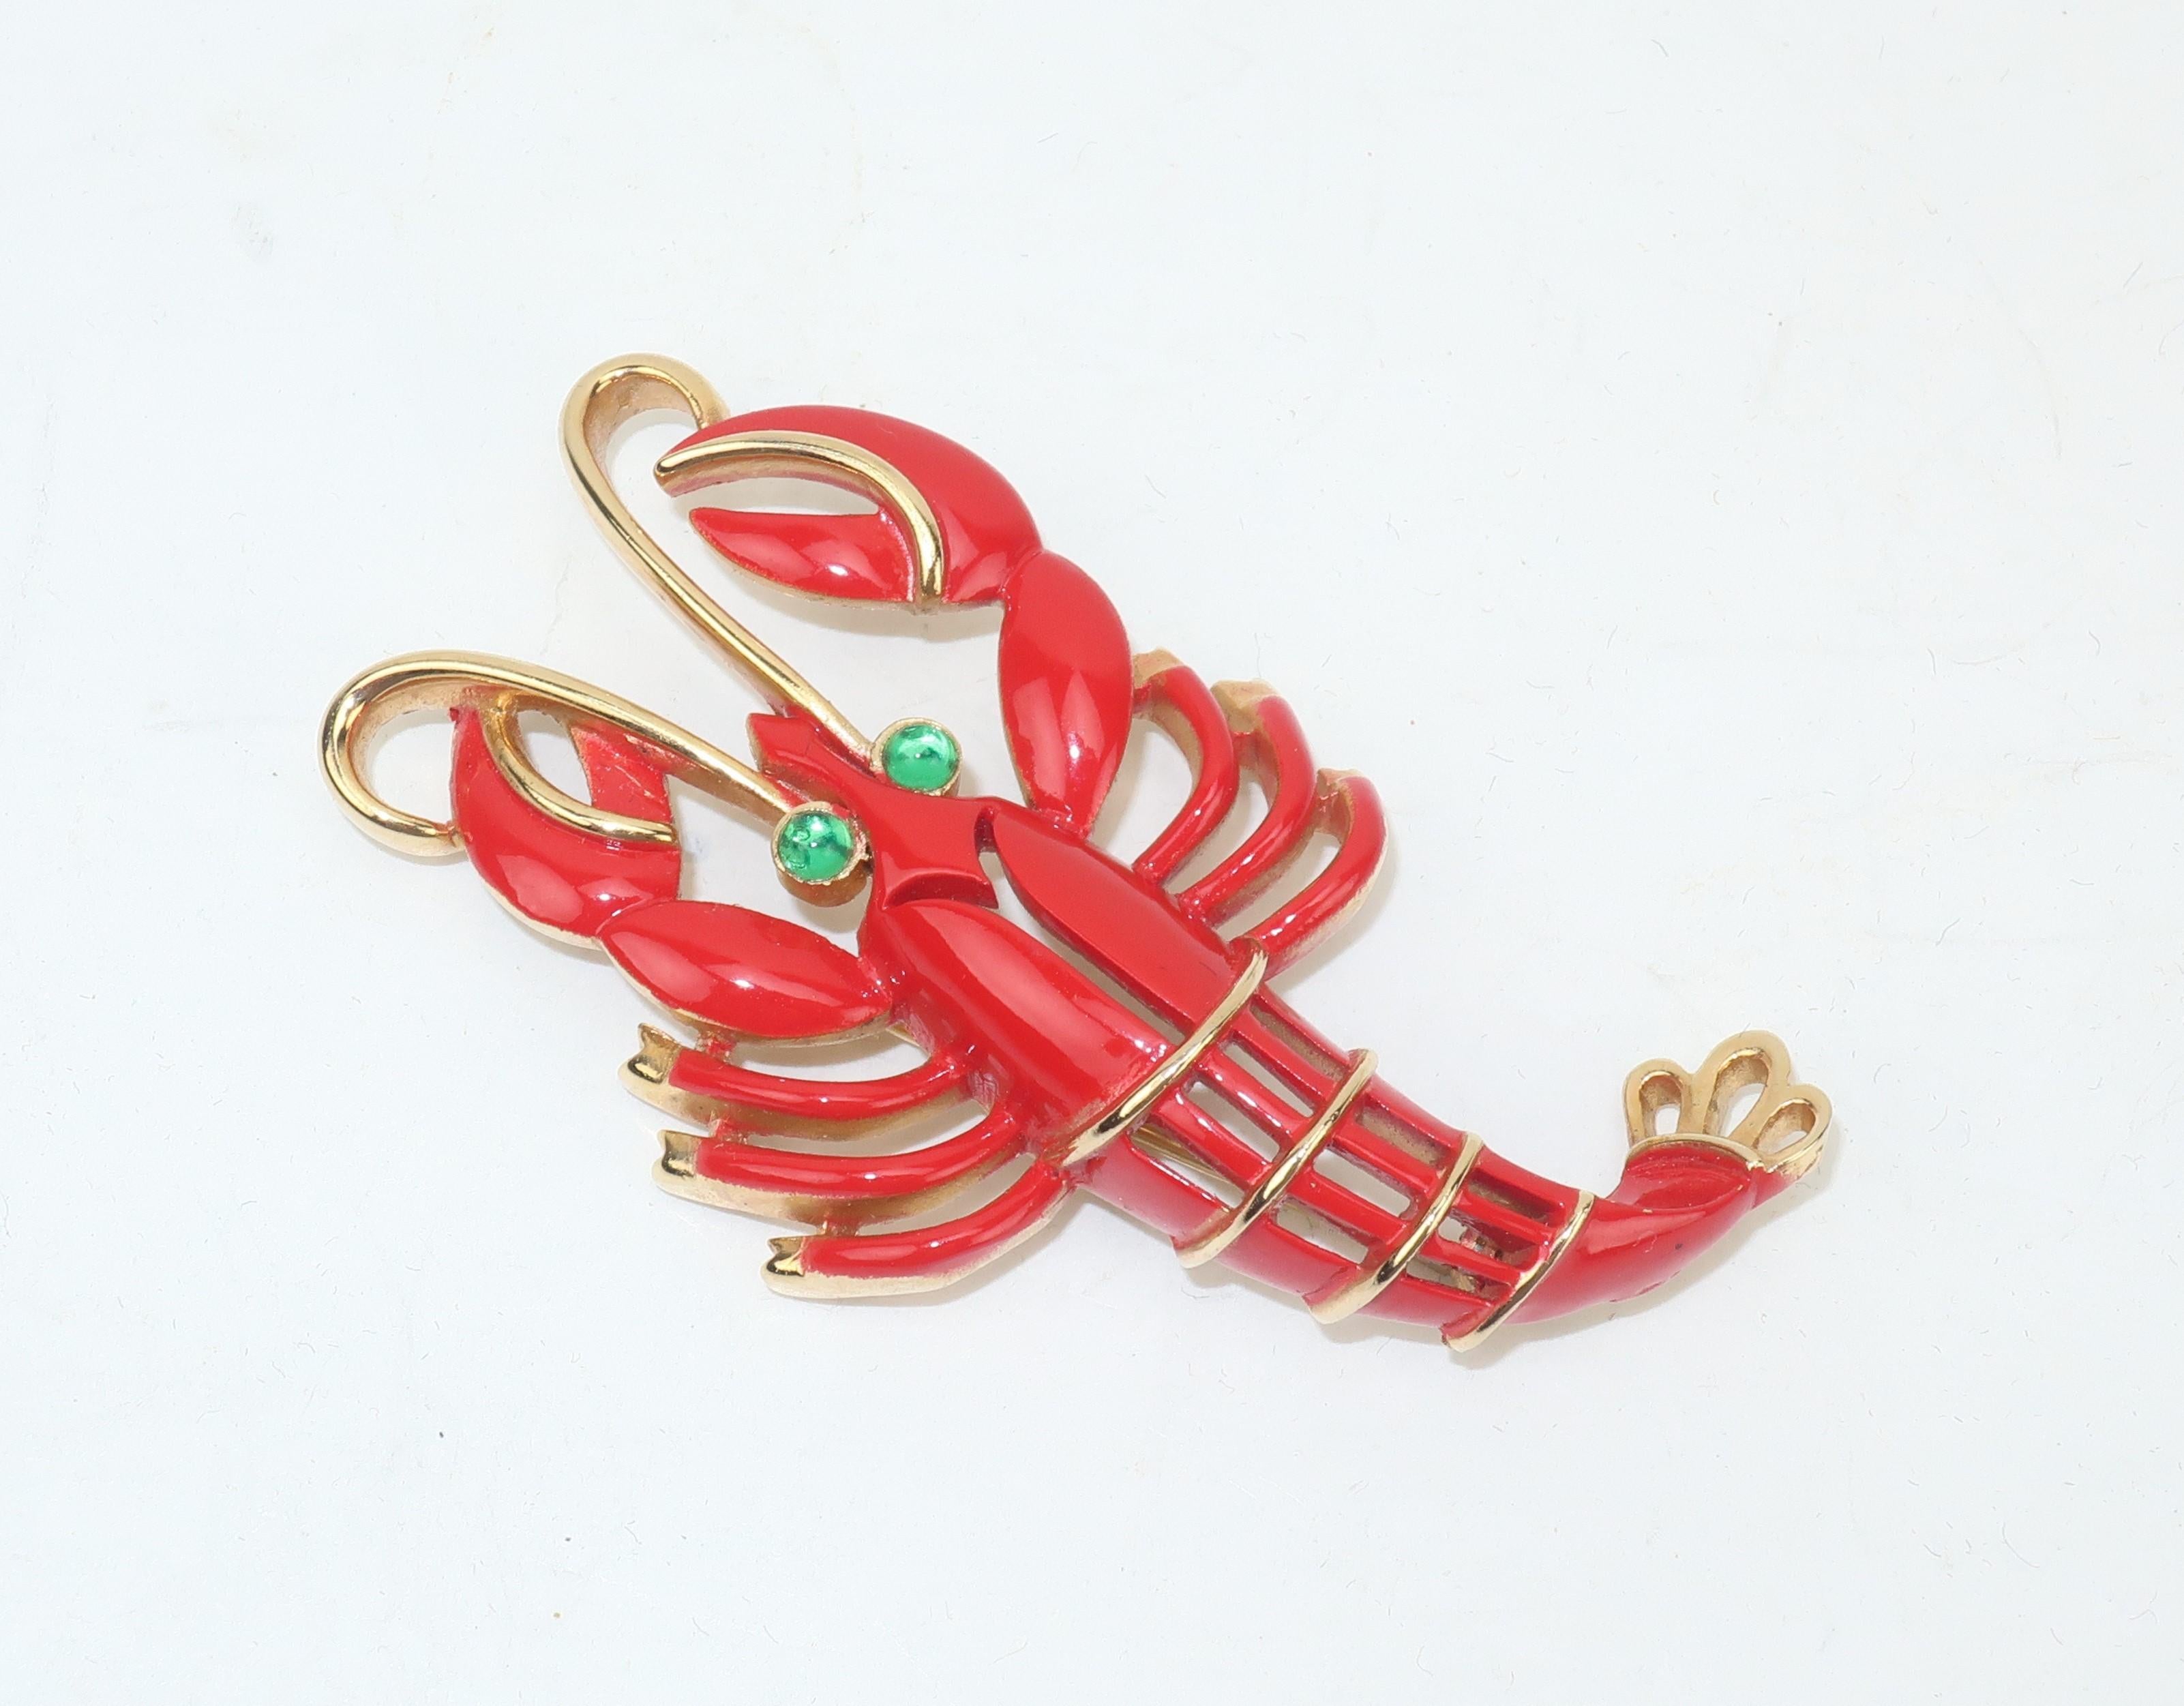 From Trifari's 1960's 'Under the Sea' collection, an adorable lobster brooch in a gold tone metal with bright red enamel and green cabochon eyes.  There is something adorably animated about this little guy including the curl of his antenna and the